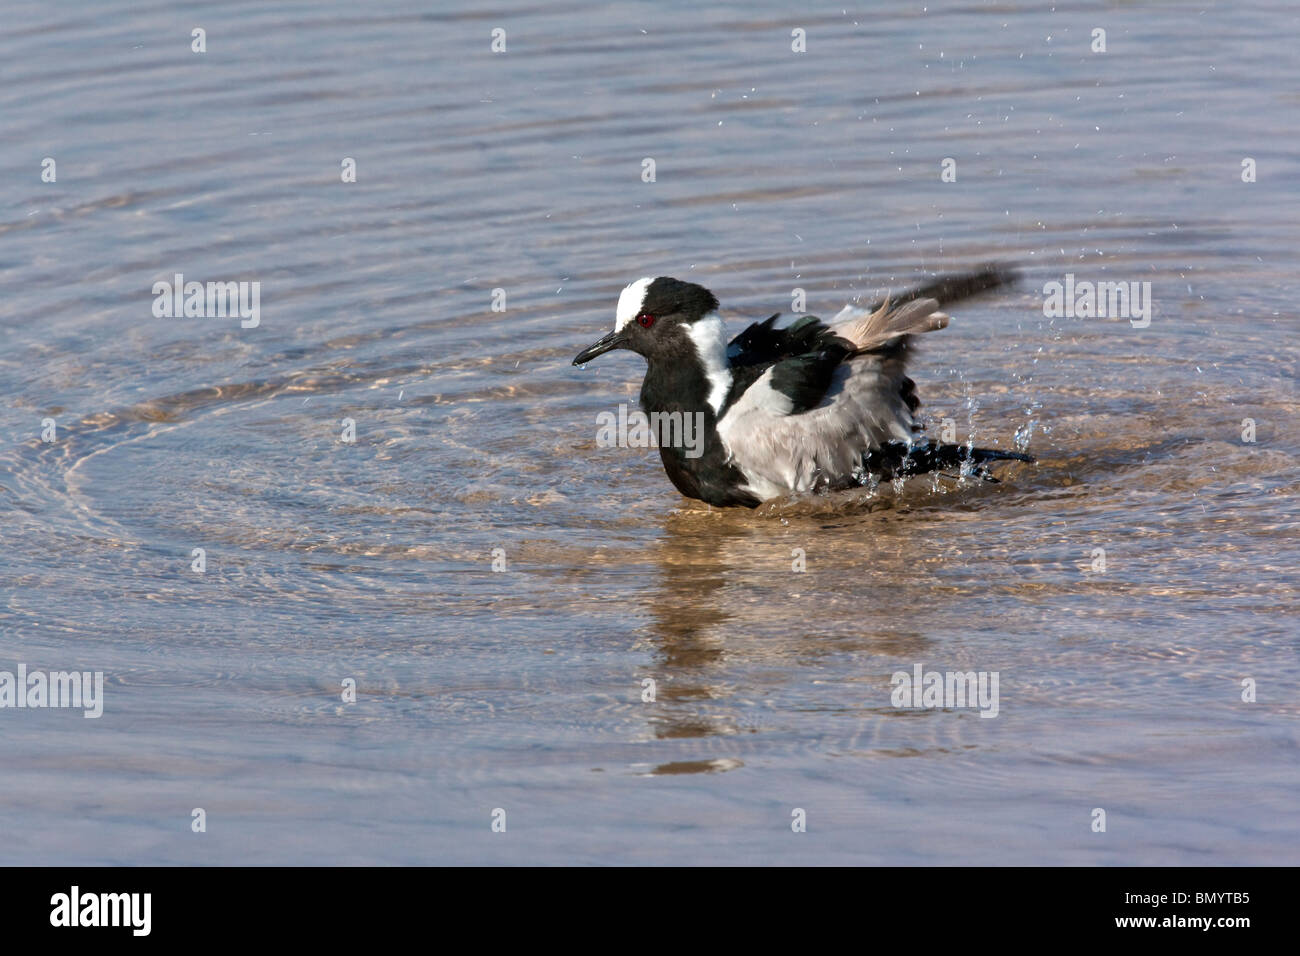 A Blacksmith Lapwing (Vanellus armatus) washing its feathers in the Chobe River in northern Botswana. Stock Photo